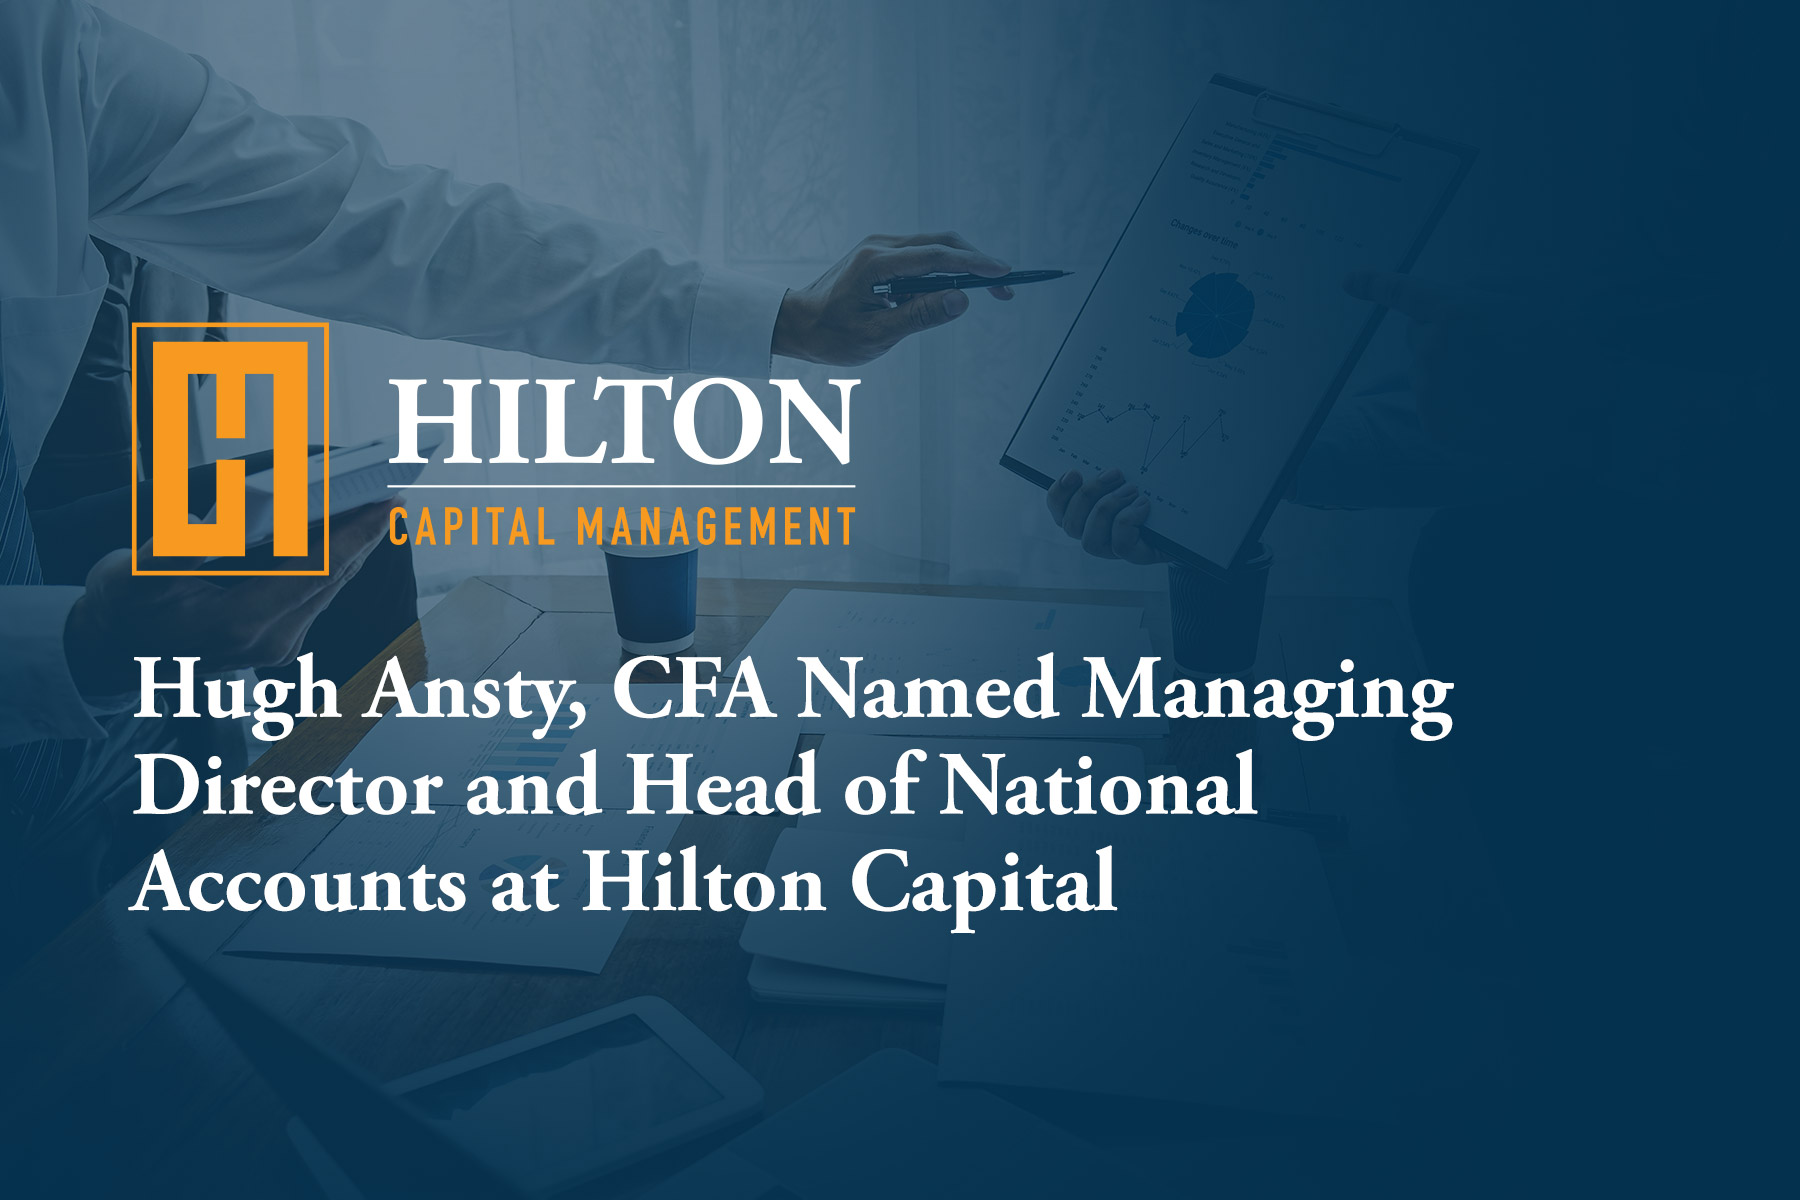 Hugh Ansty, CFA Named Managing Director and Head of National Accounts at Hilton Capital